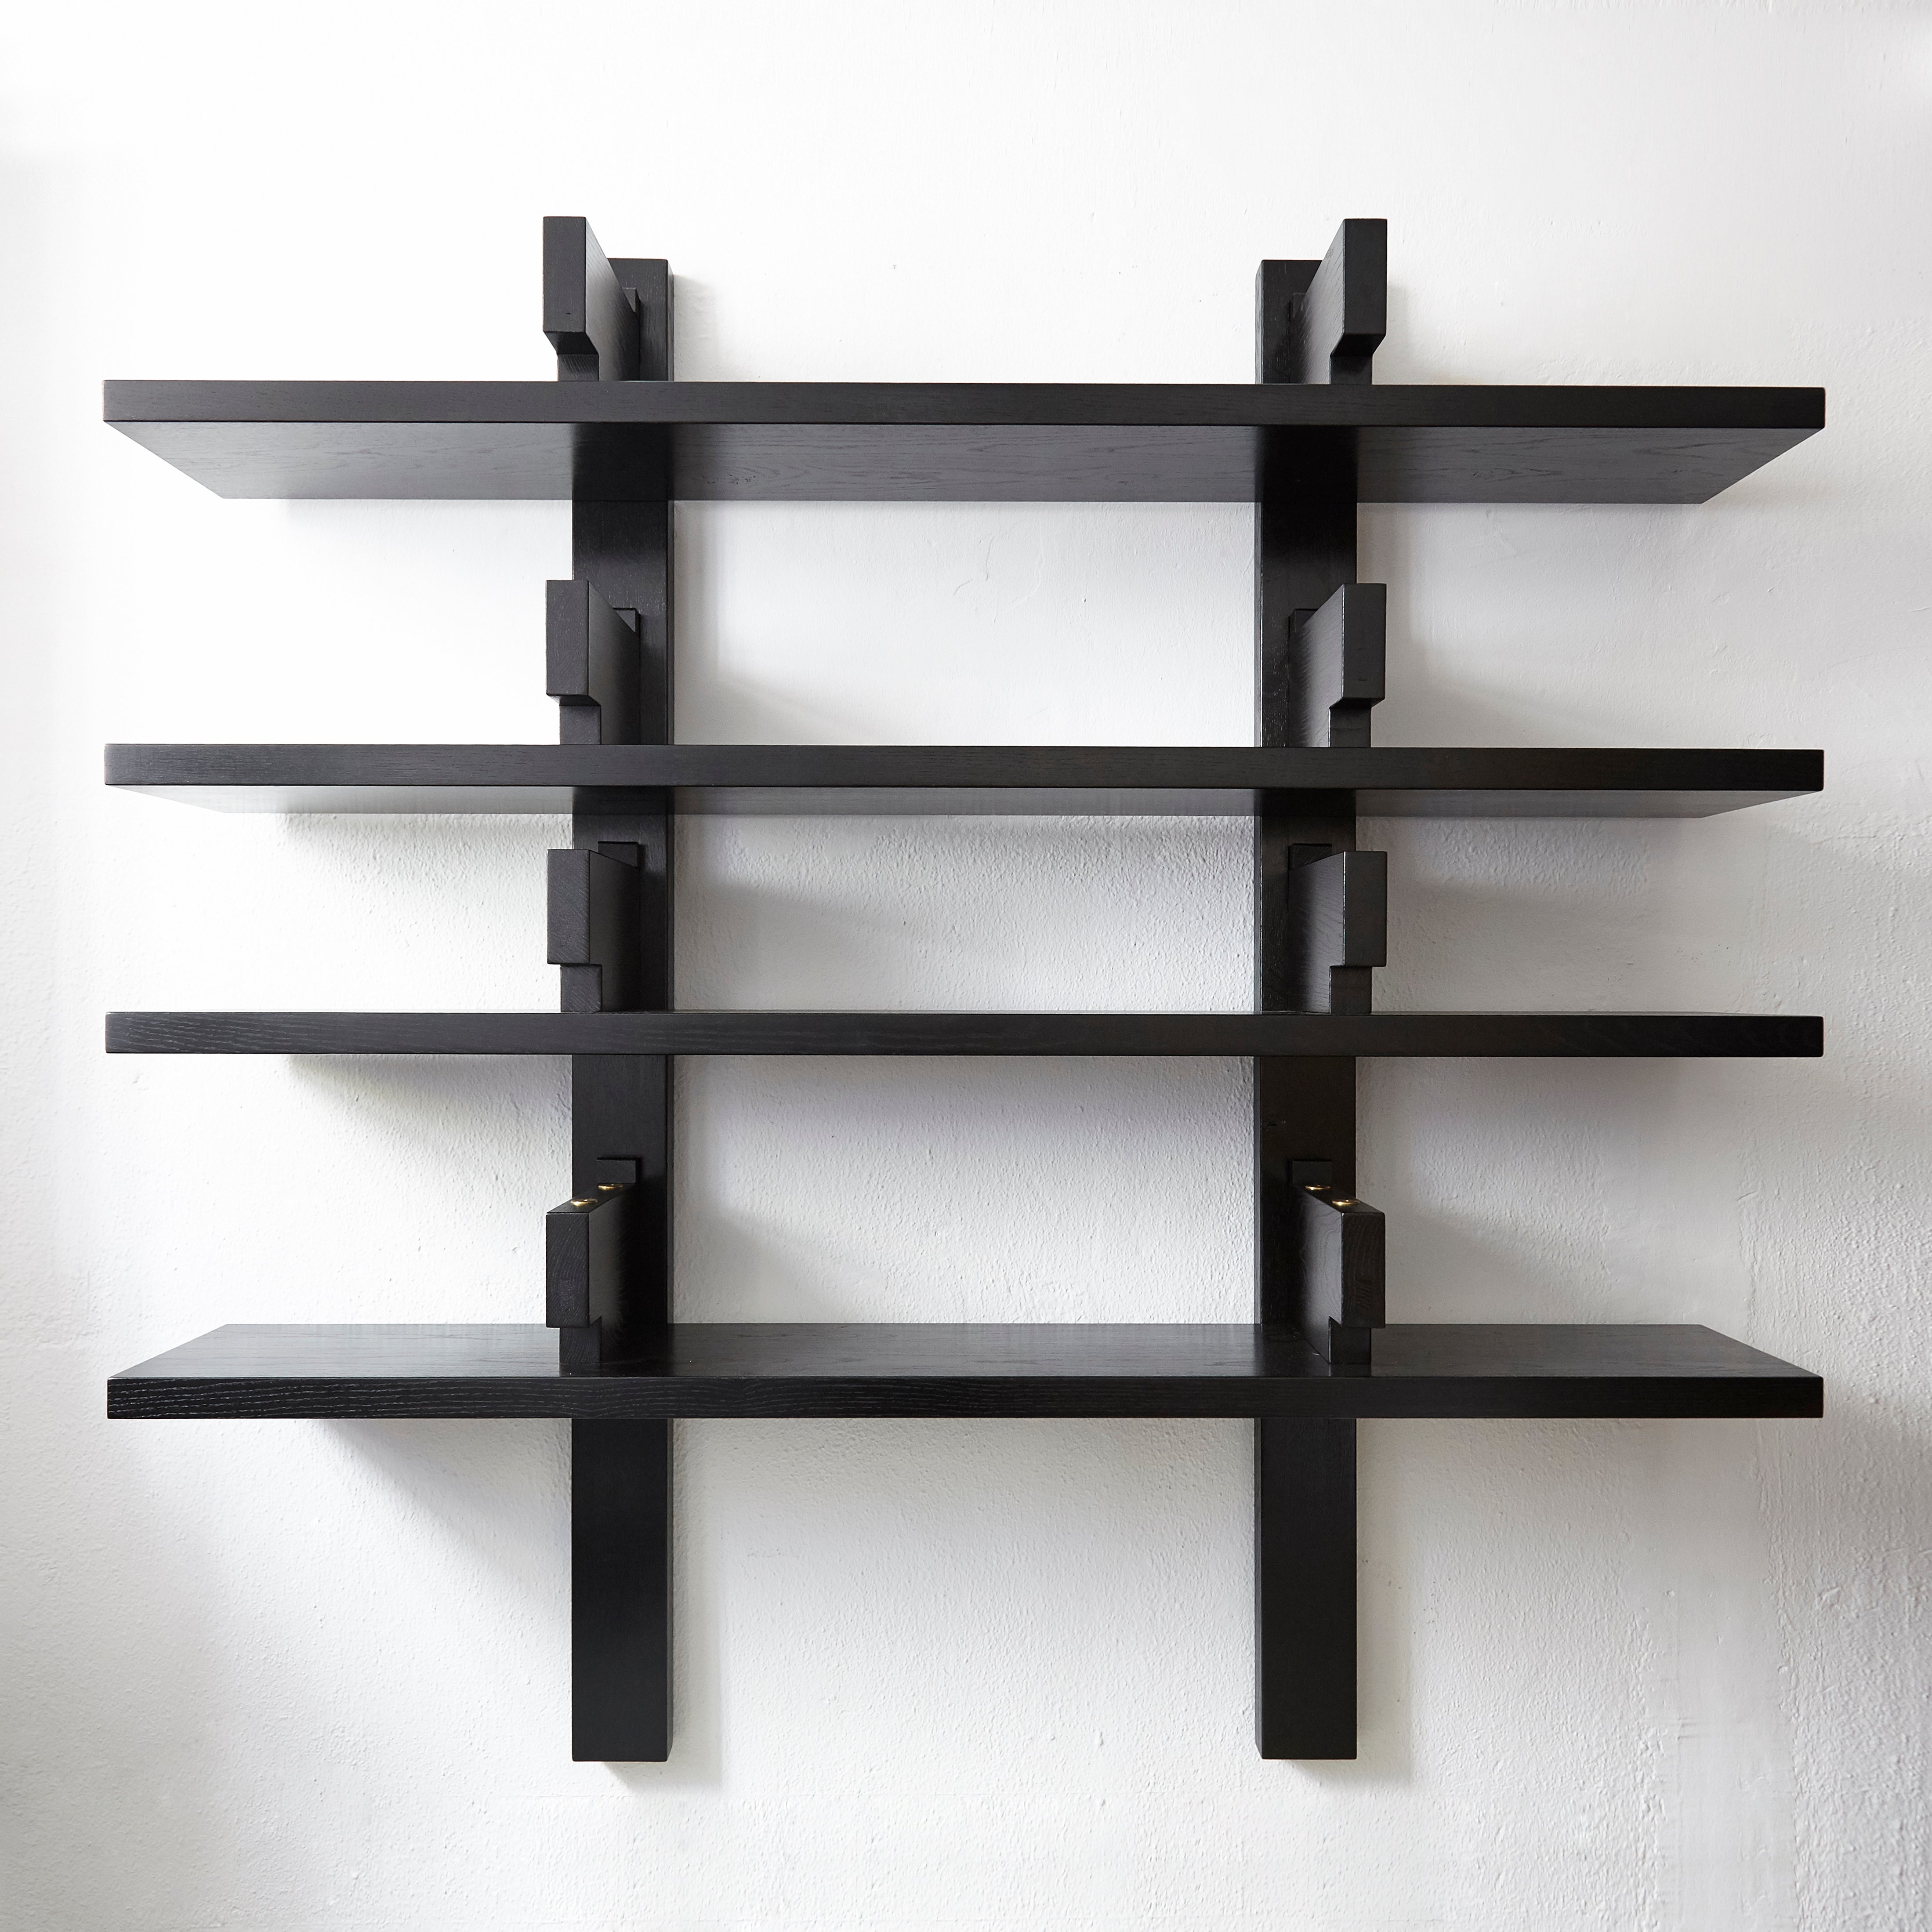 Enhance your interior with the special black edition of the B17 wall-mounted bookshelf, designed by celebrated French designer Pierre Chapo circa 1970. This striking piece, manufactured by Chapo Creation in 2019, showcases the beauty and durability